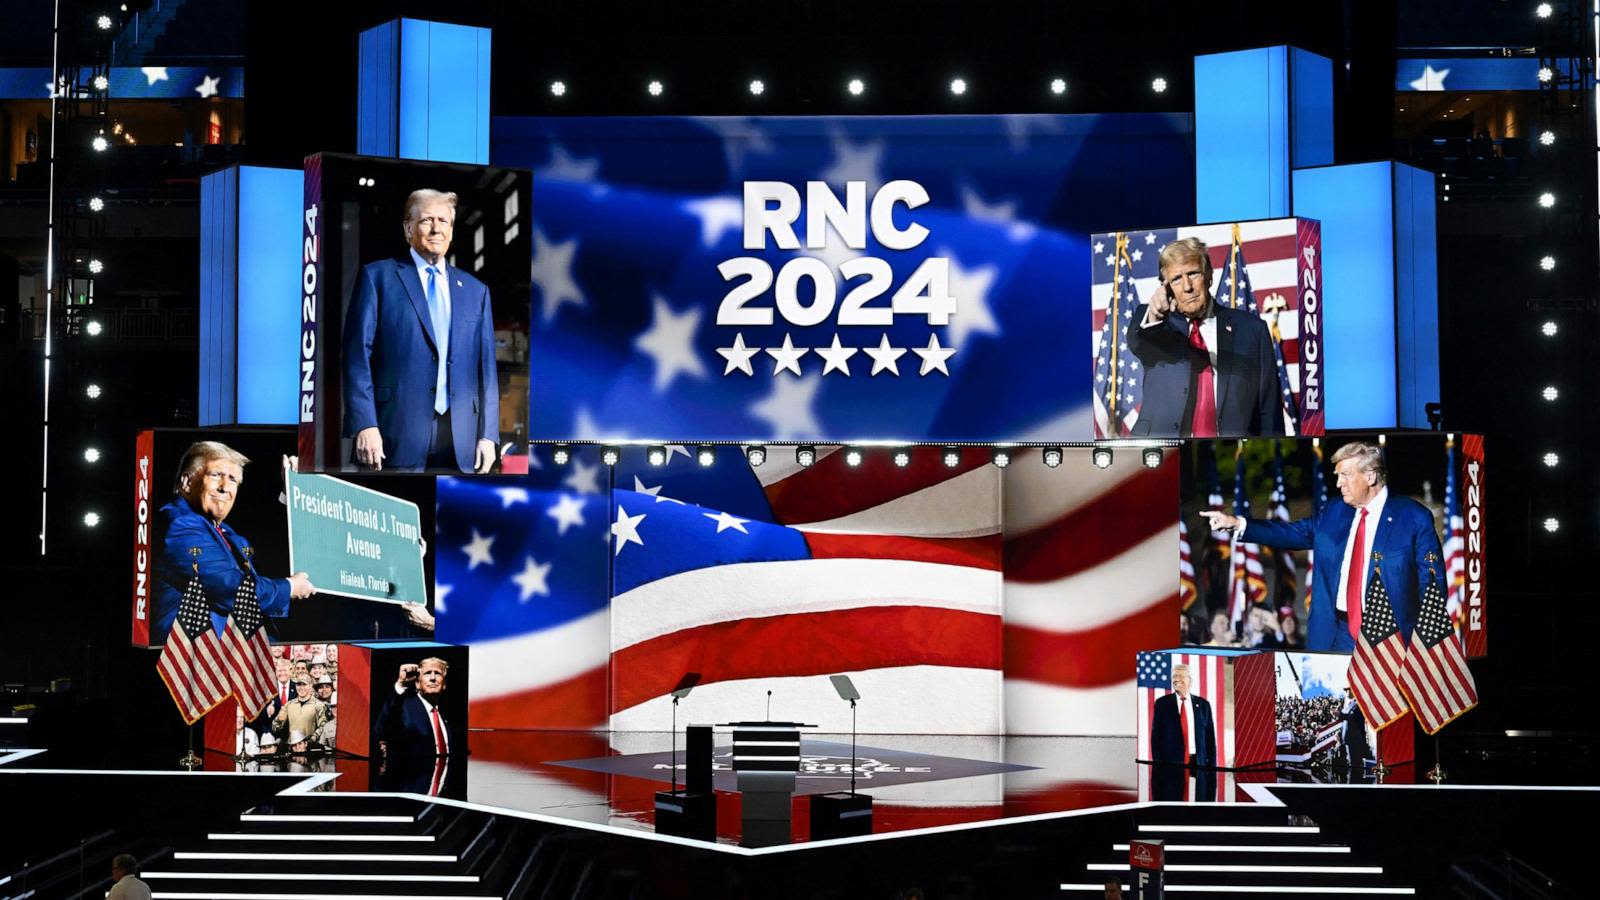 RNC 2024 Day 1 live updates: Trump makes VP pick, Rubio told he's not it